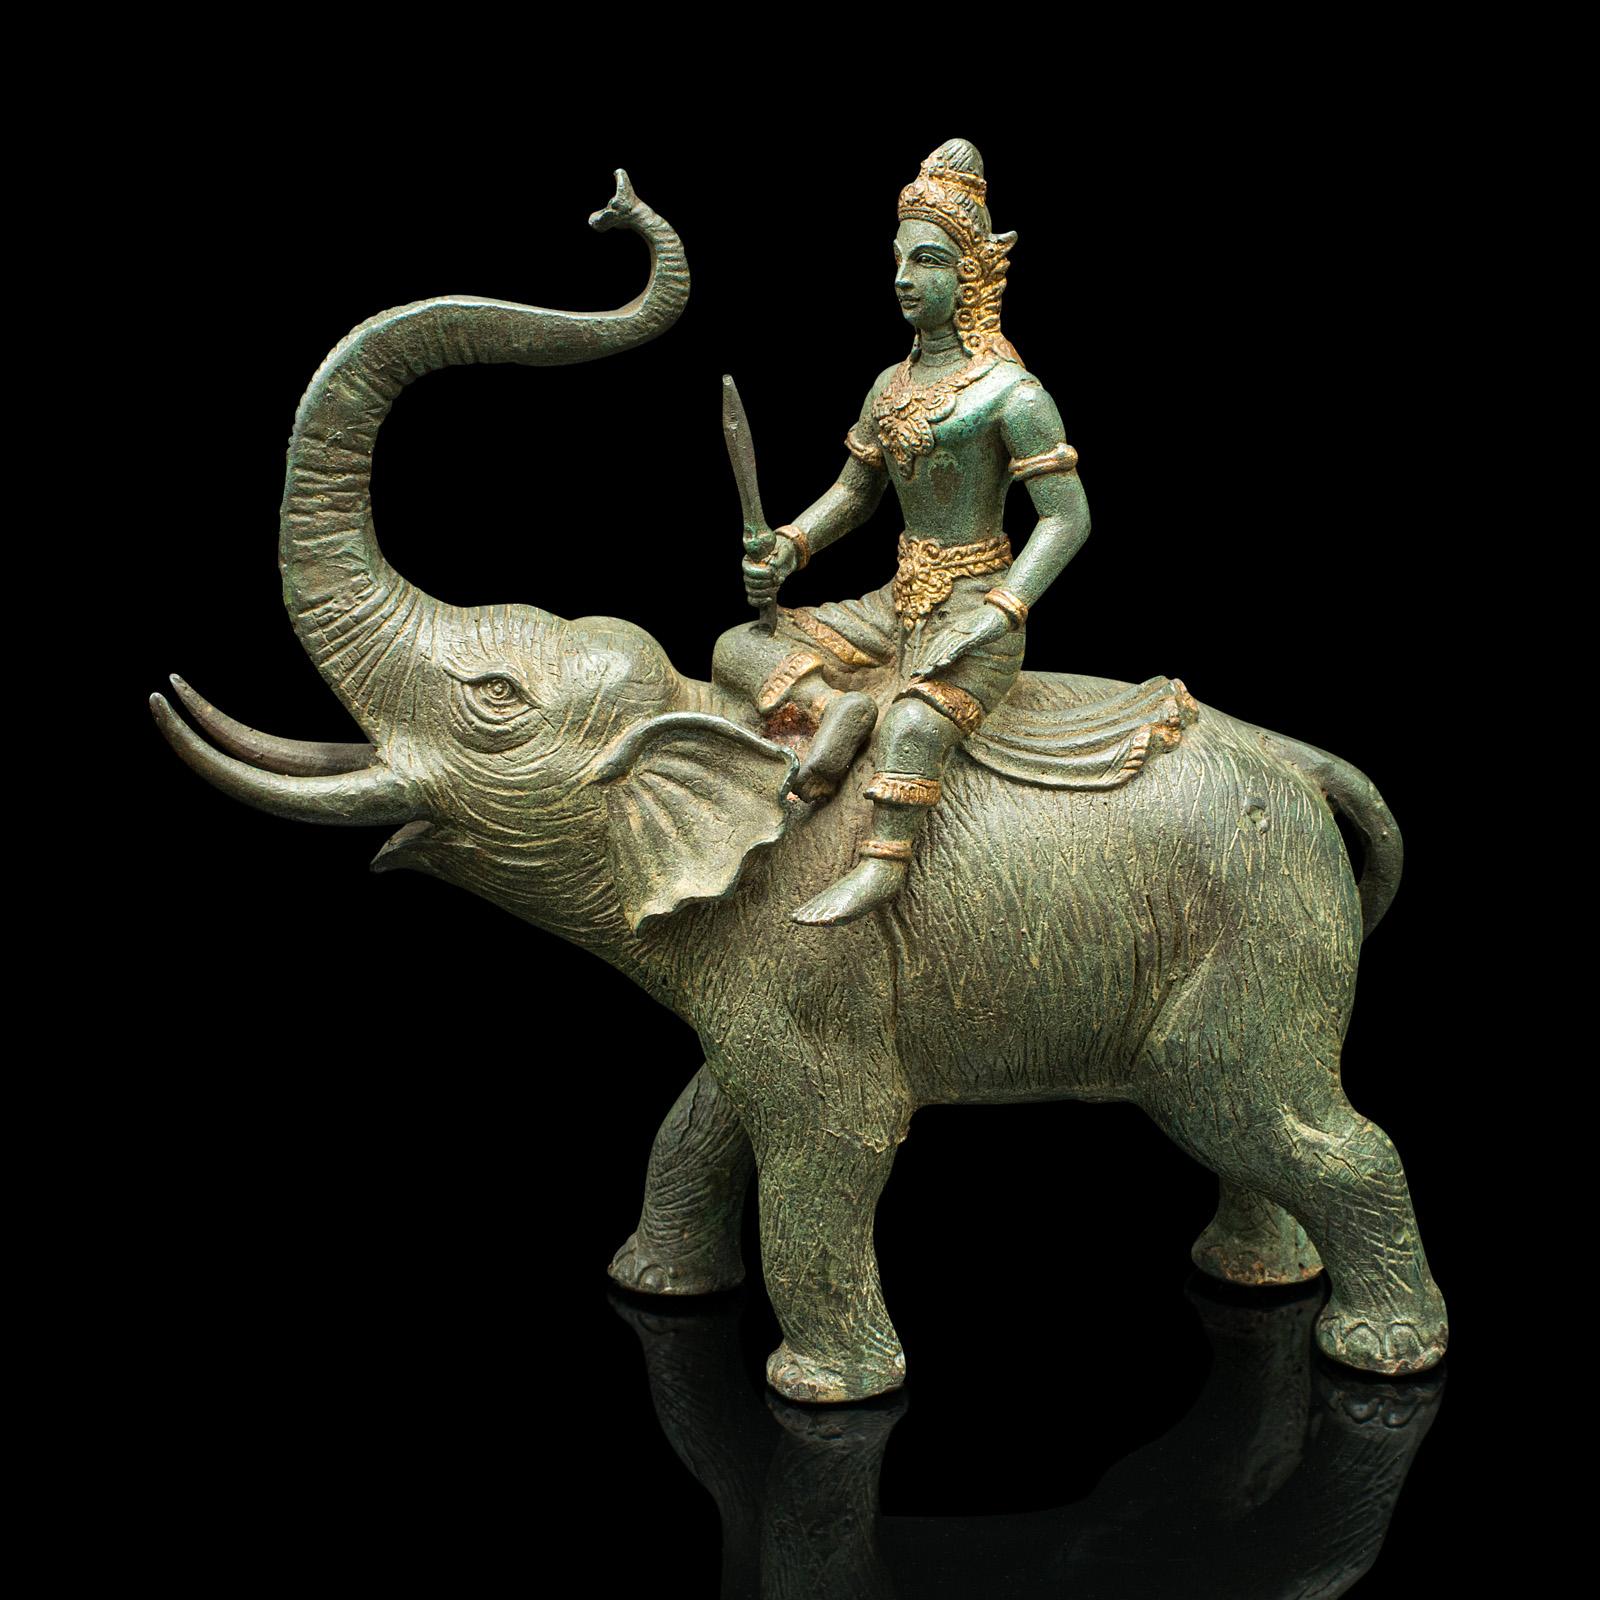 This is an antique elephant figure. An Asian, heavy bronze ornament with mounted Thai deity, dating to the late Victorian period, circa 1880.

Superb antique figure with seated deity
Displays a desirable aged patina and in good order
Substantial